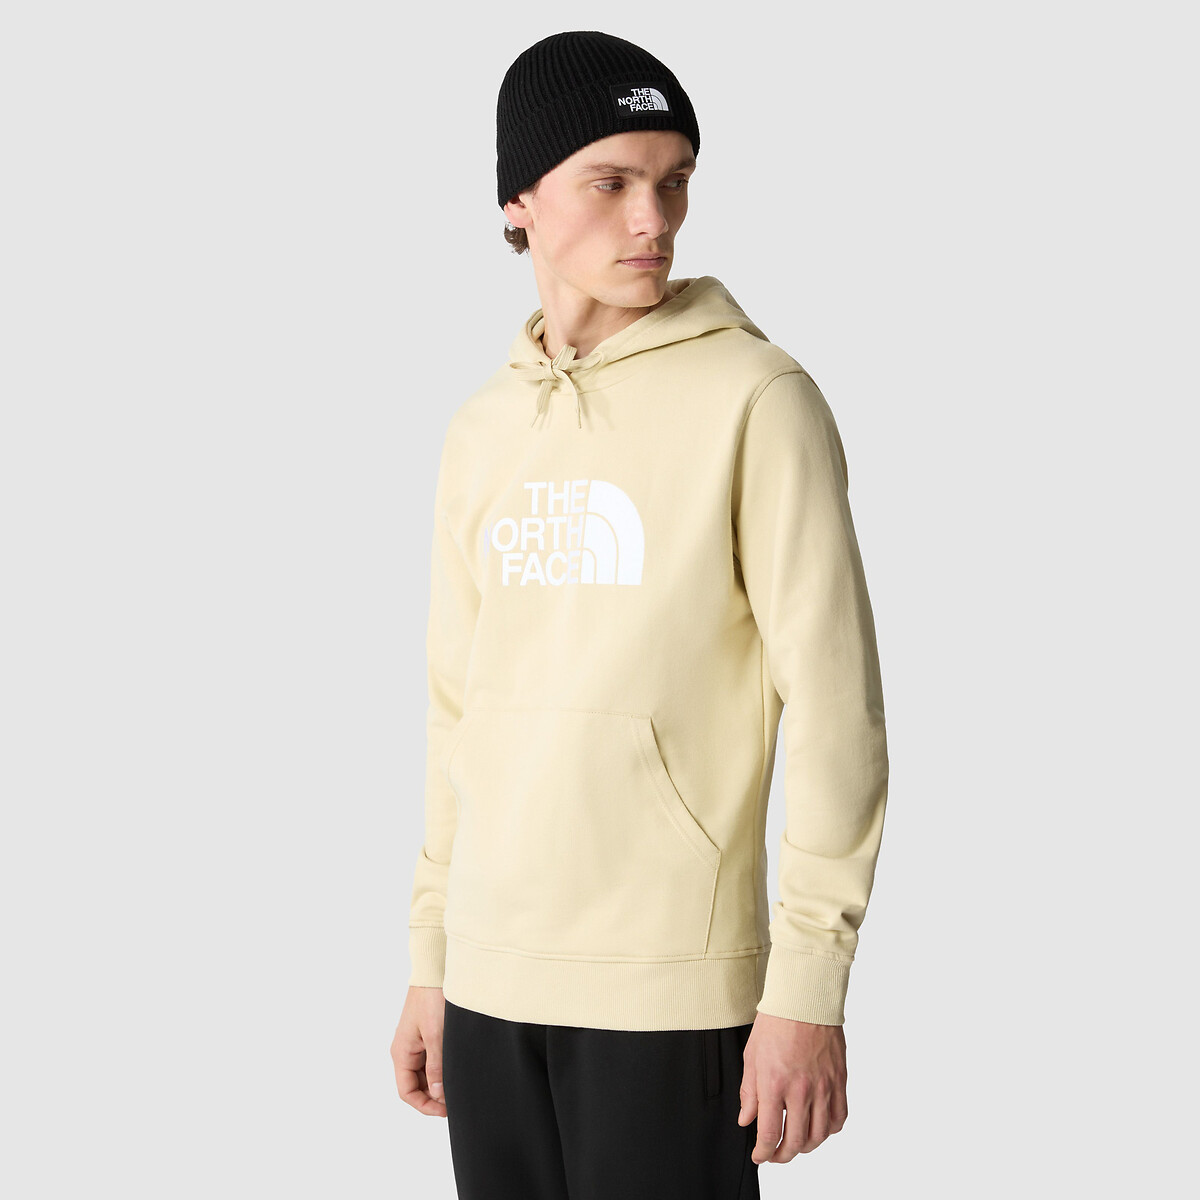 The north face Hoodie Reaxion